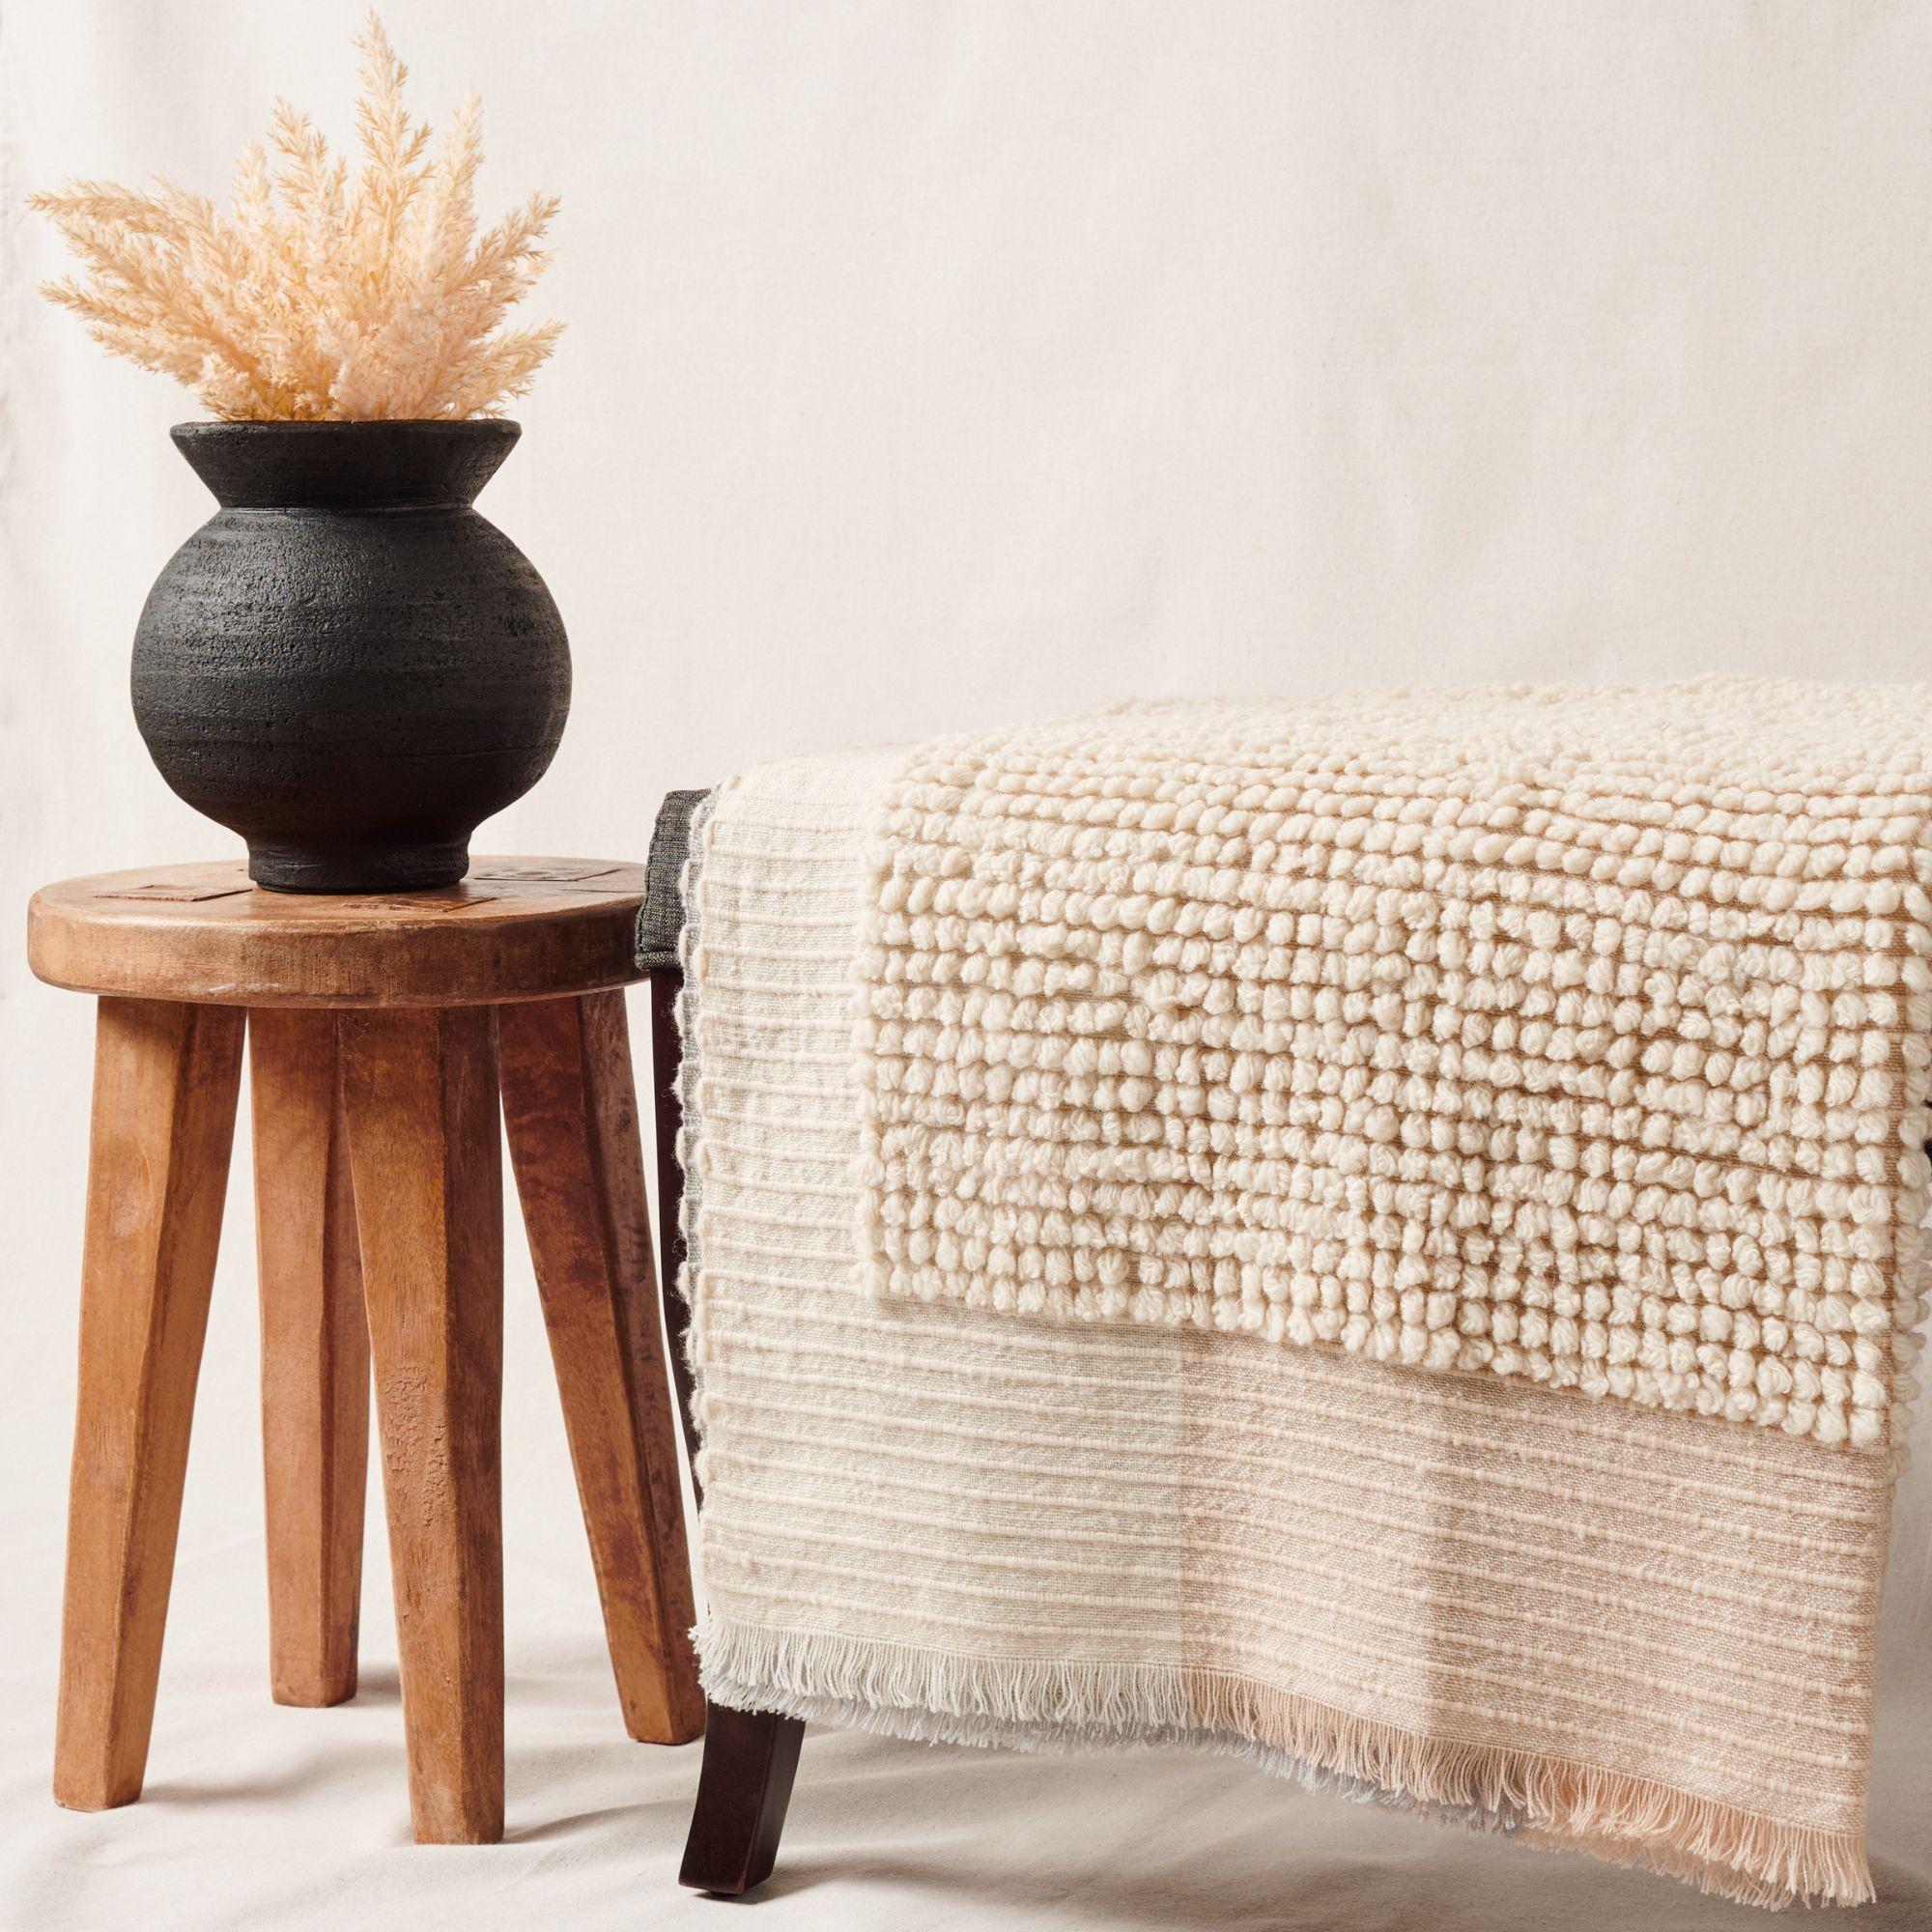 Plush in hand feel , Butterscotch is a masterfully handwoven luxurious plush throw. One of a kind handwoven textile piece, this is an artistic statement to your living space. Compliment your personal spaces by using this as an exclusive throw / bed